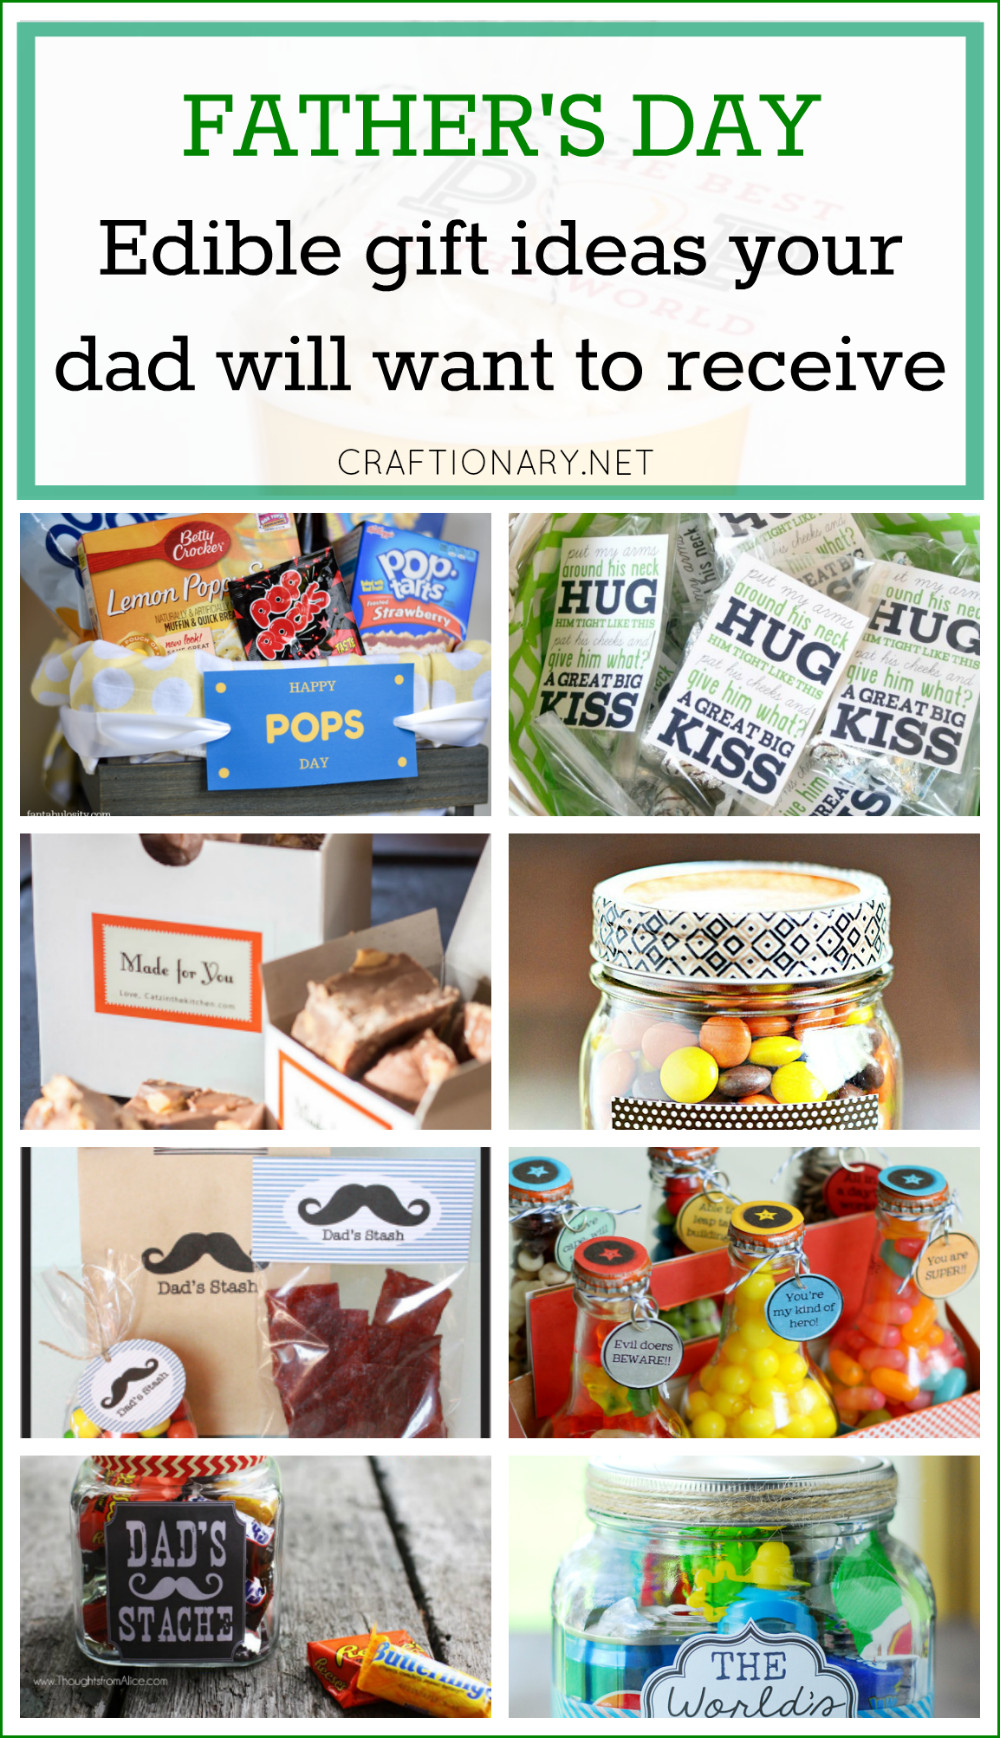 Father'S Day Food Gift Ideas
 20 Edible Gift Ideas for Father s Day that your dad will